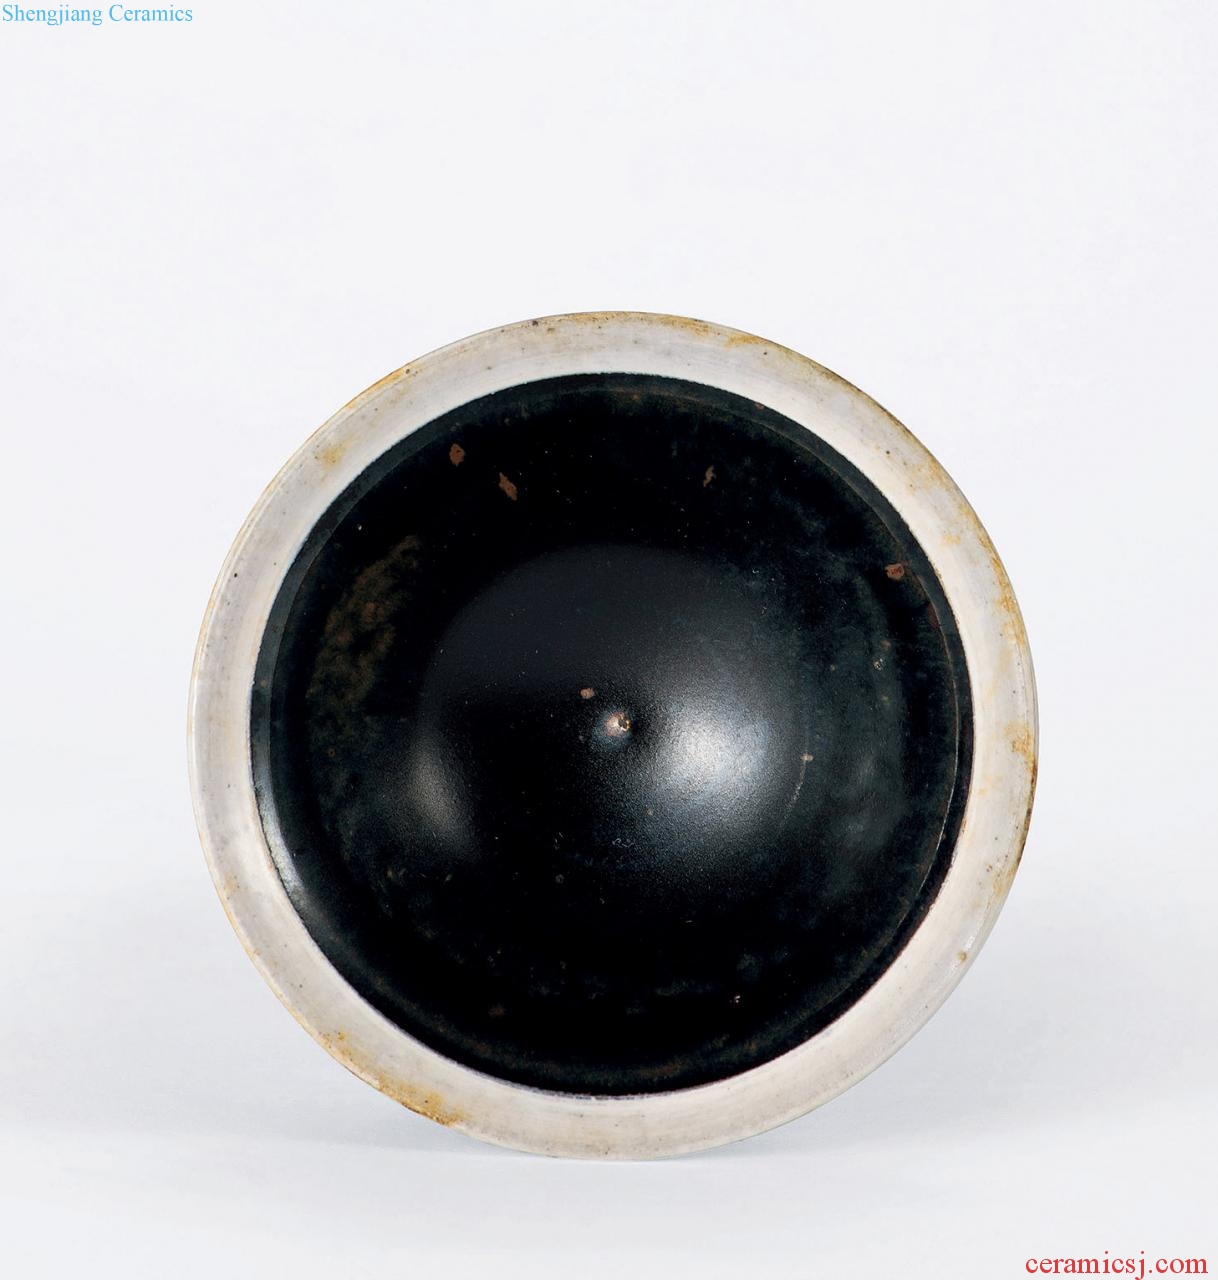 Gold/northern song dynasty (960-1234), the black glaze white bowl